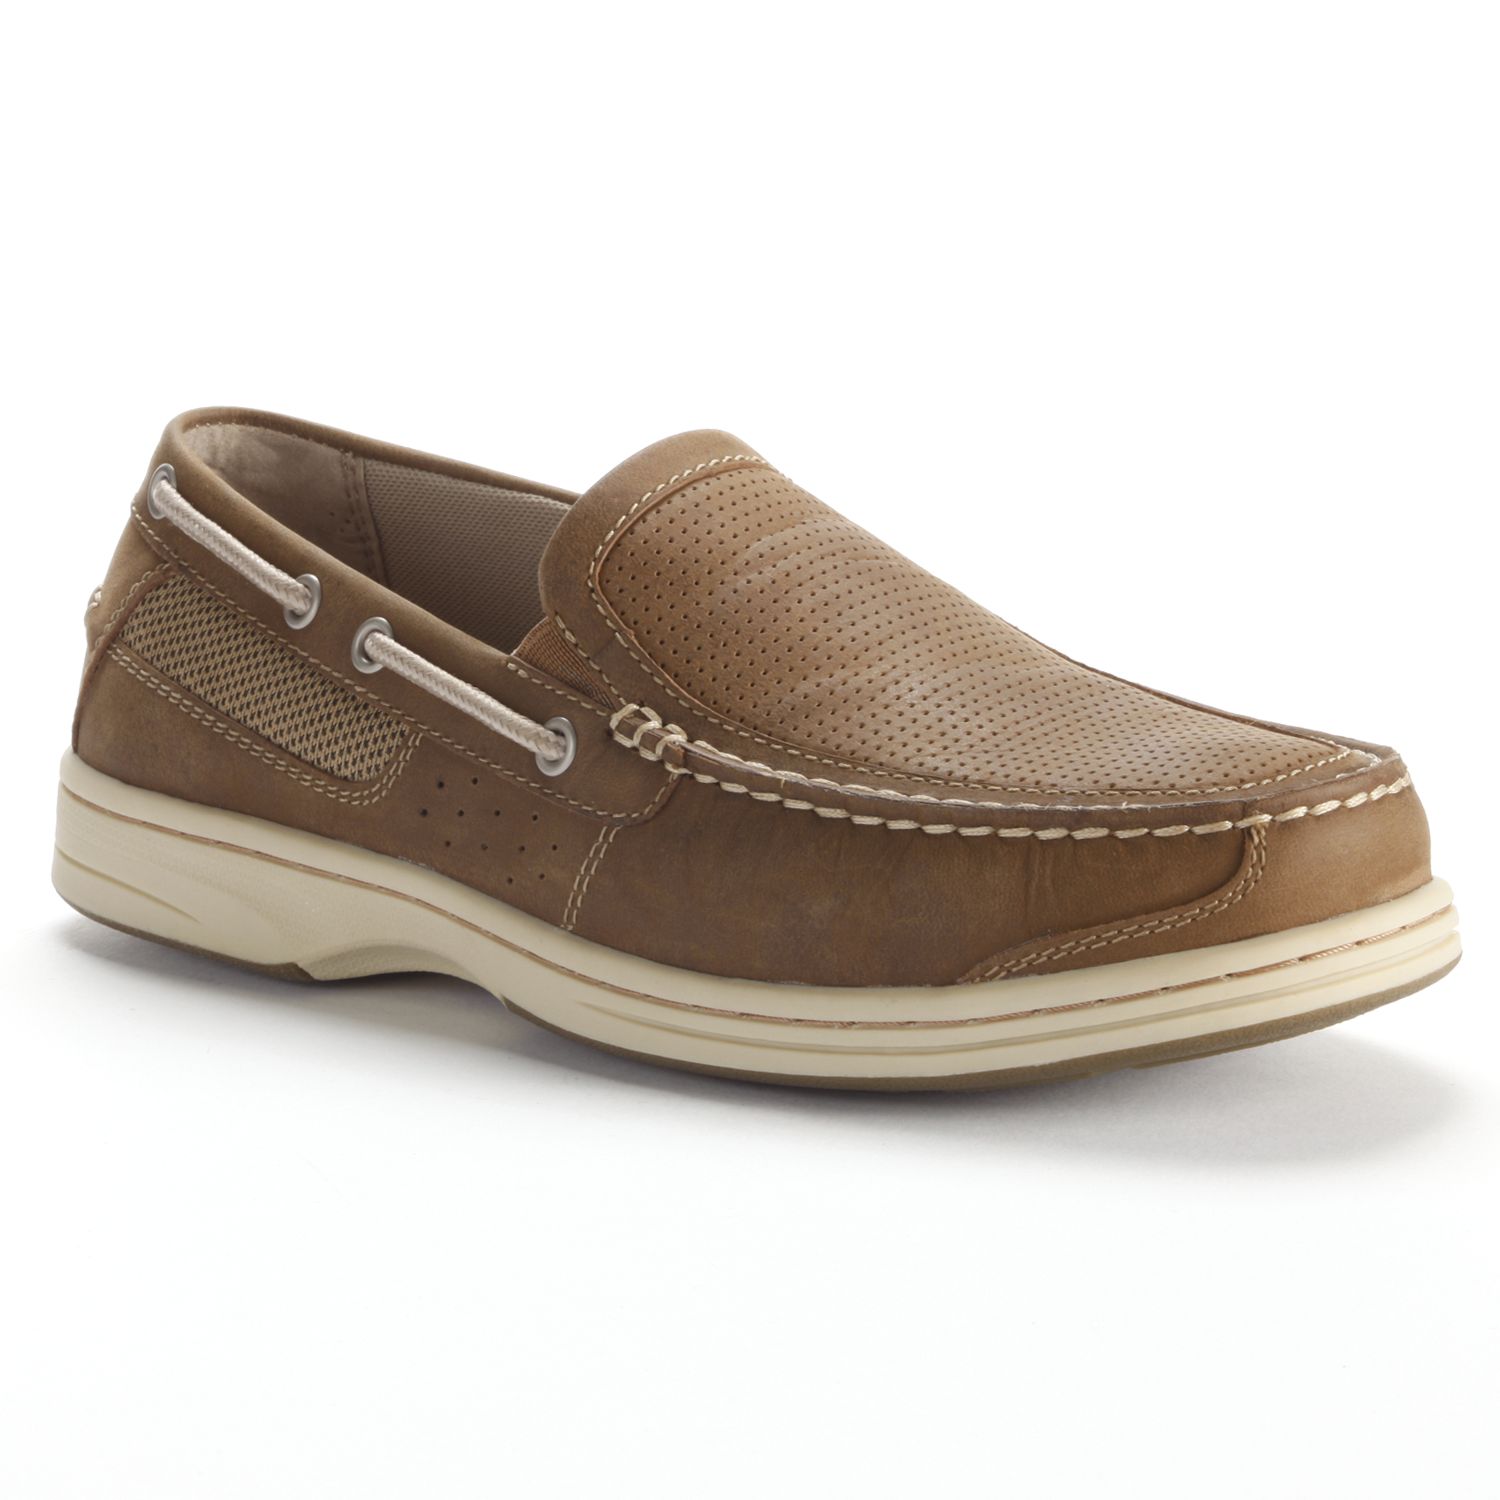 chaps slip on shoes